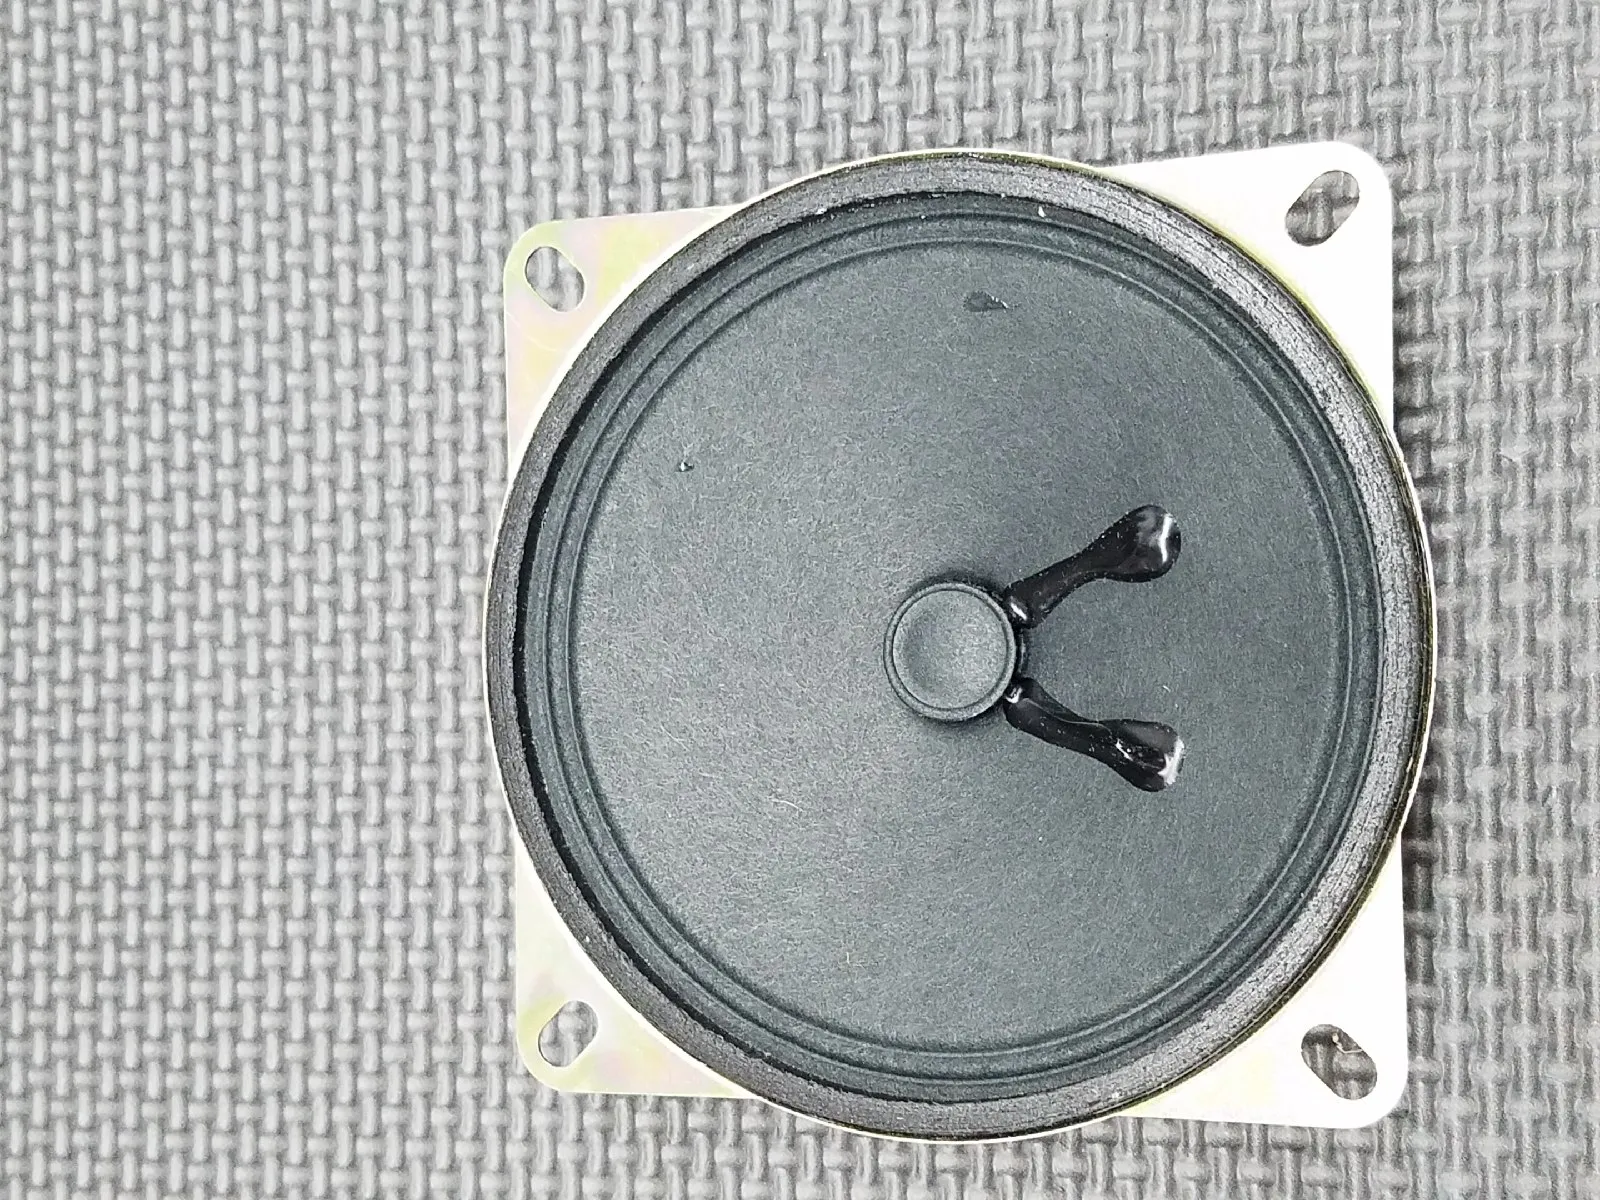 Workman 3.5 inch replacement speaker sa-350